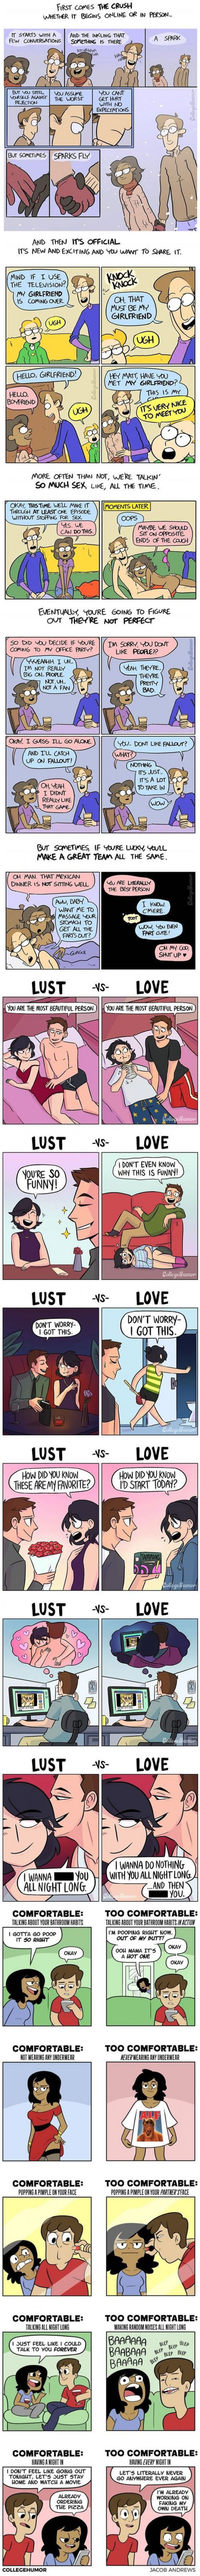 10 Cute Comics That Perfectly Describe Relationship